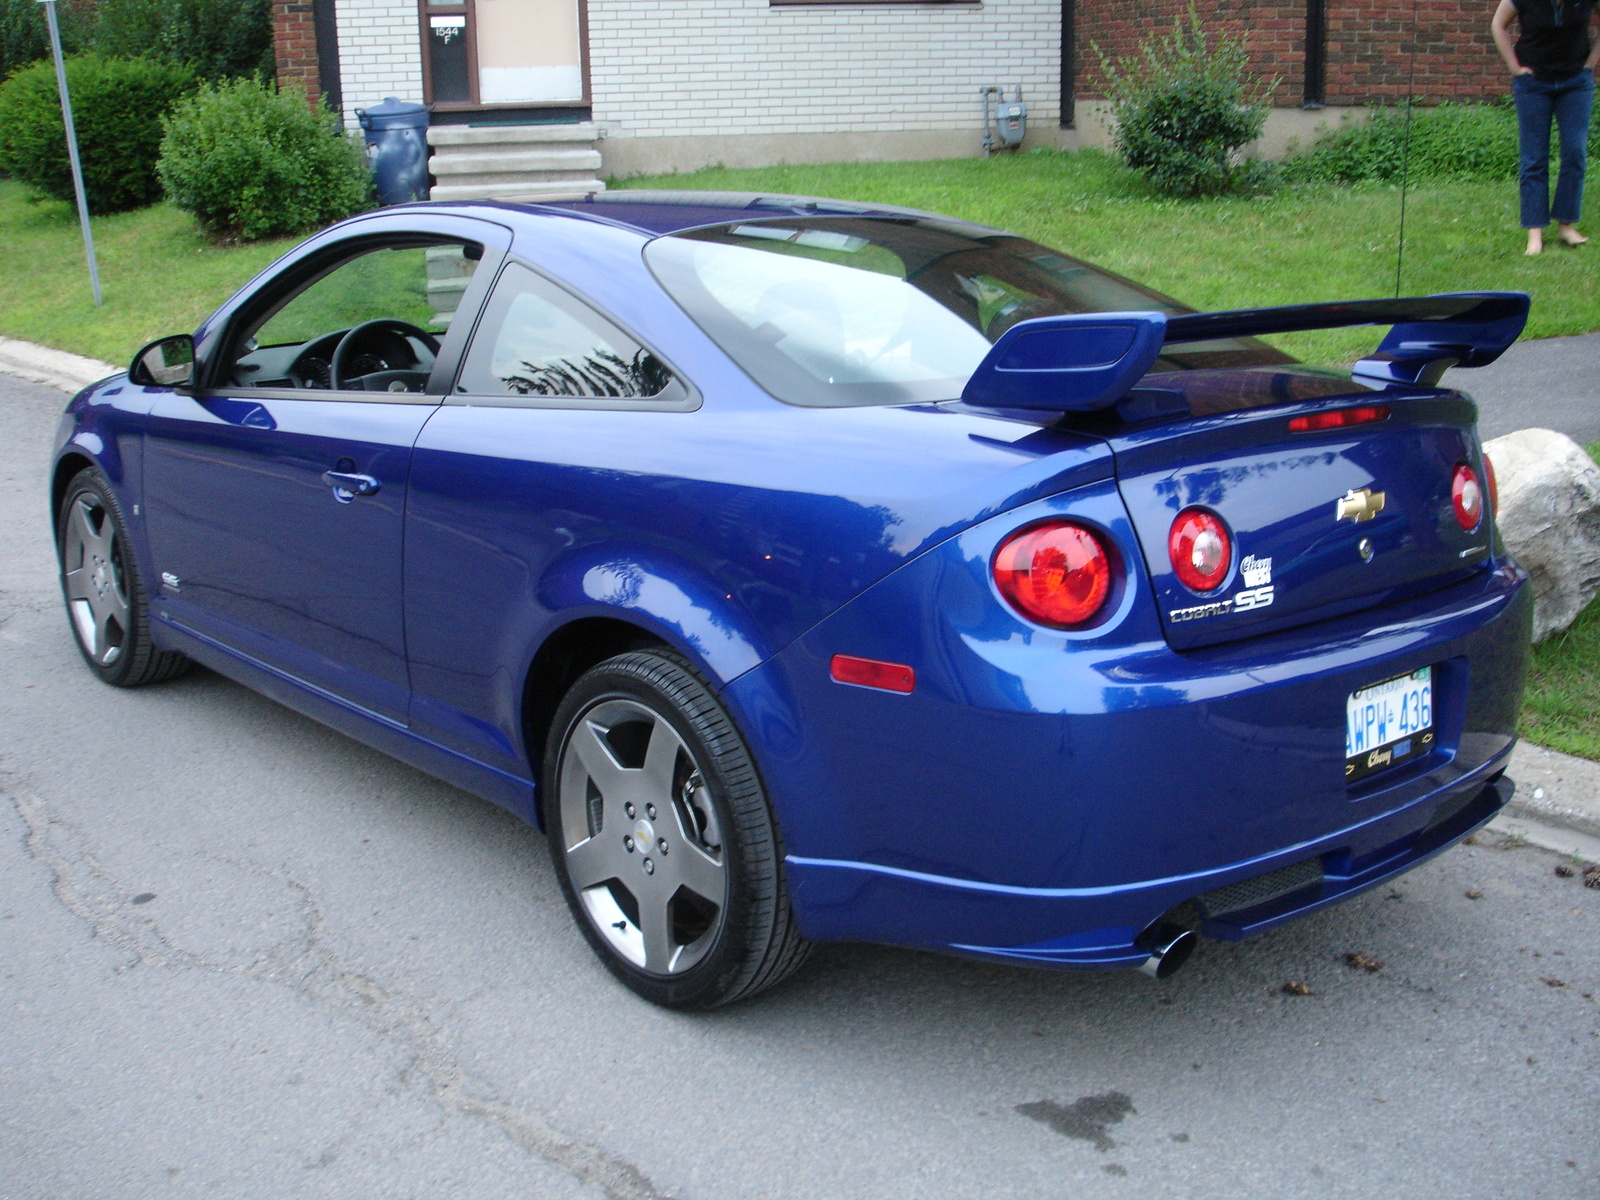 2006 Chevrolet Cobalt SS Supercharged - Pictures - 2006 Chevrolet.